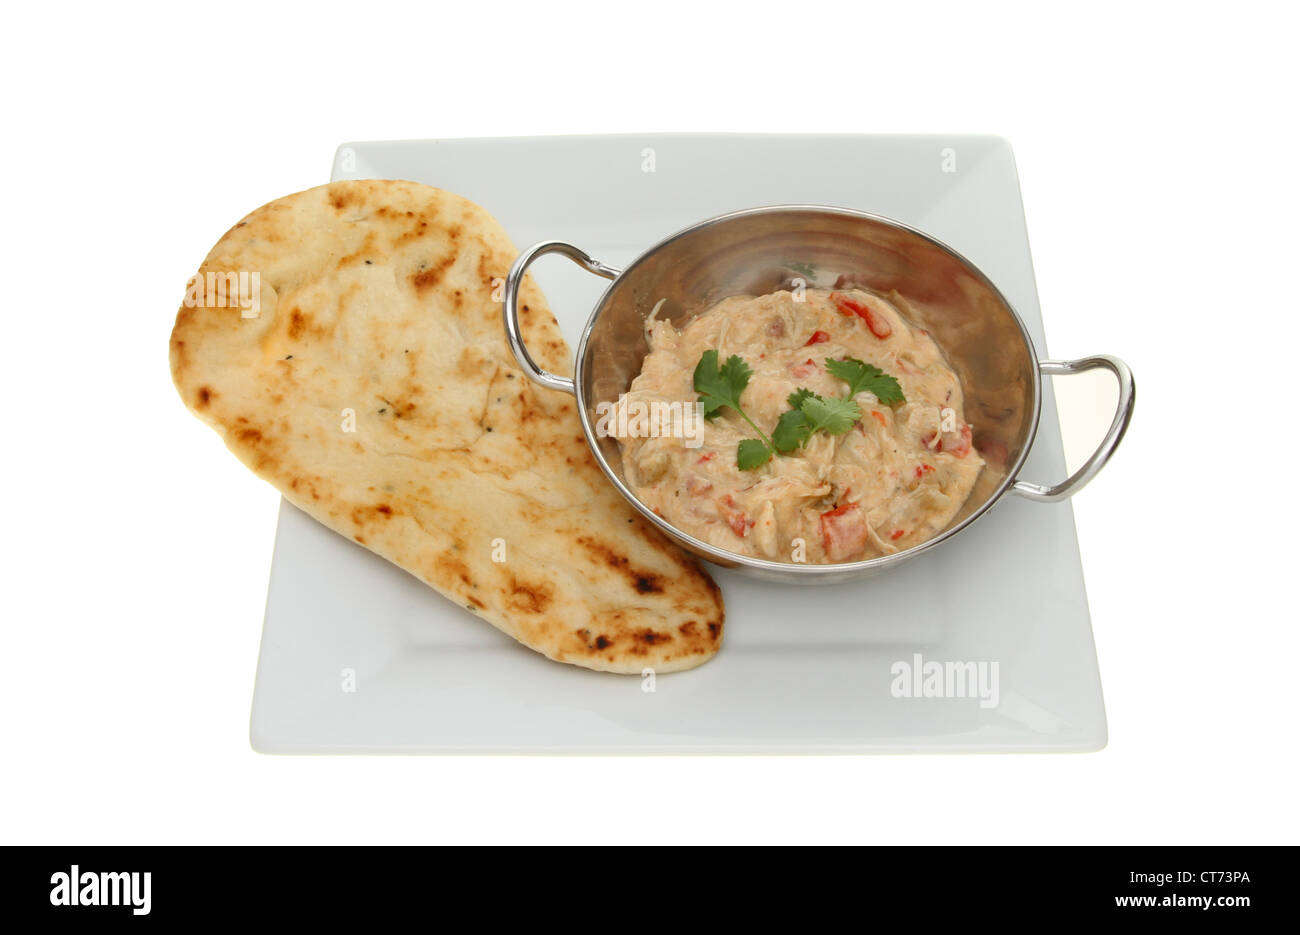 Chicken curry in a balti dish with a naan bread on a plate isolated against white Stock Photo